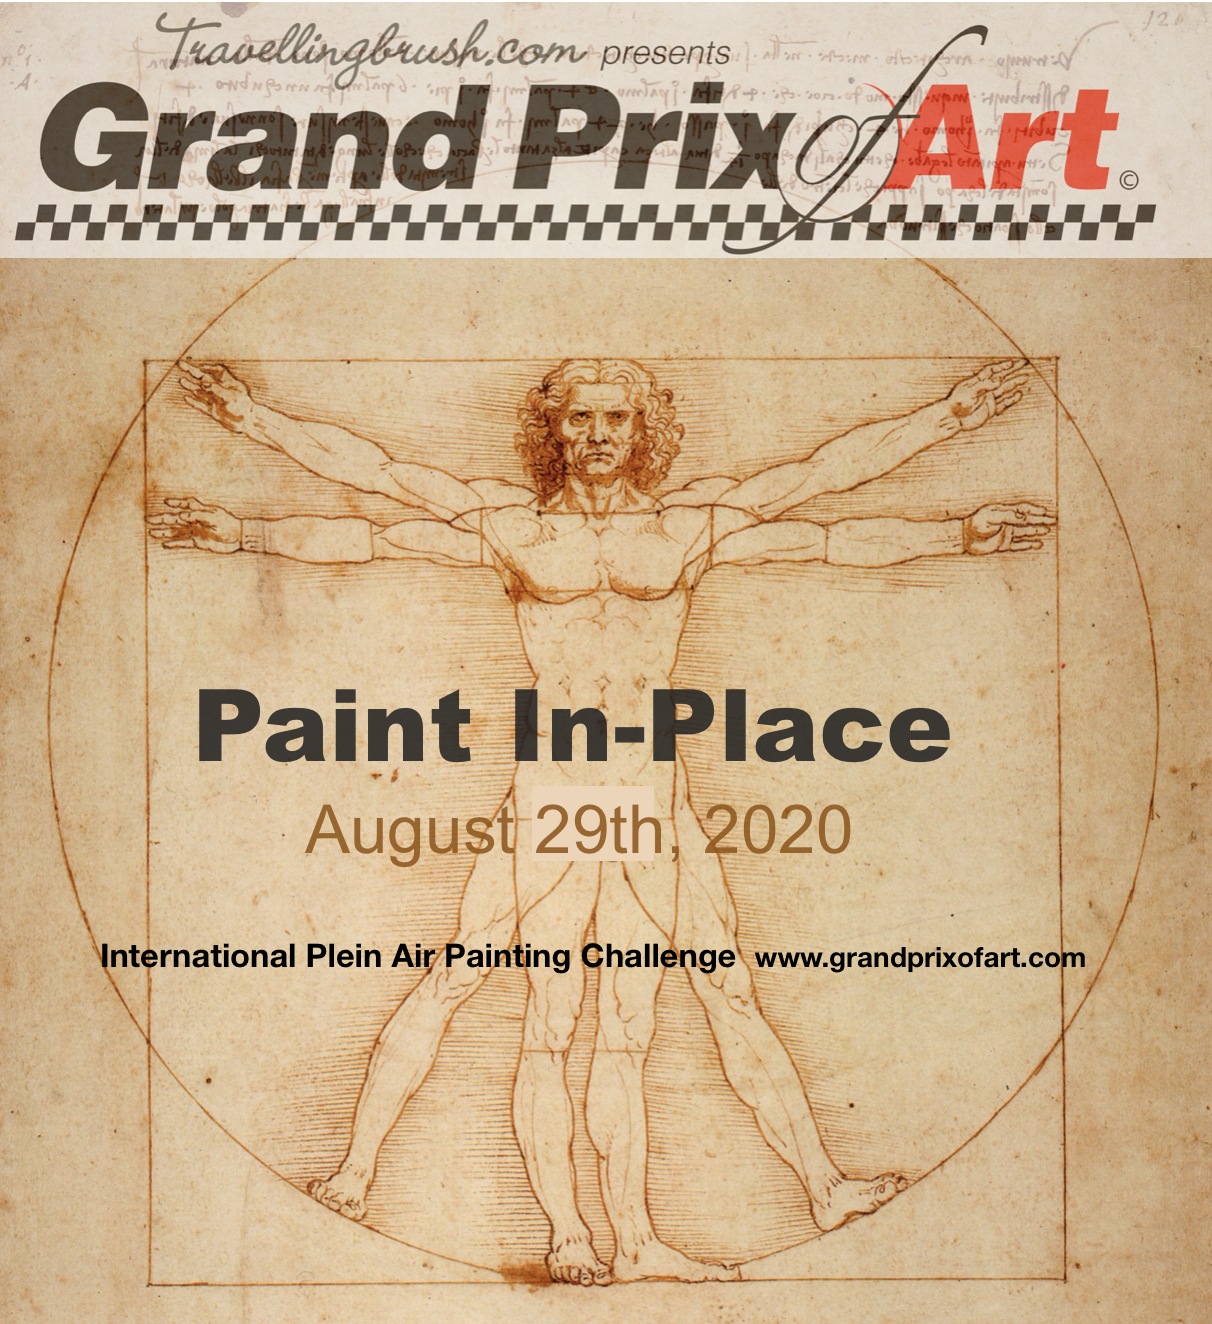 2020 International Paint-in-Place